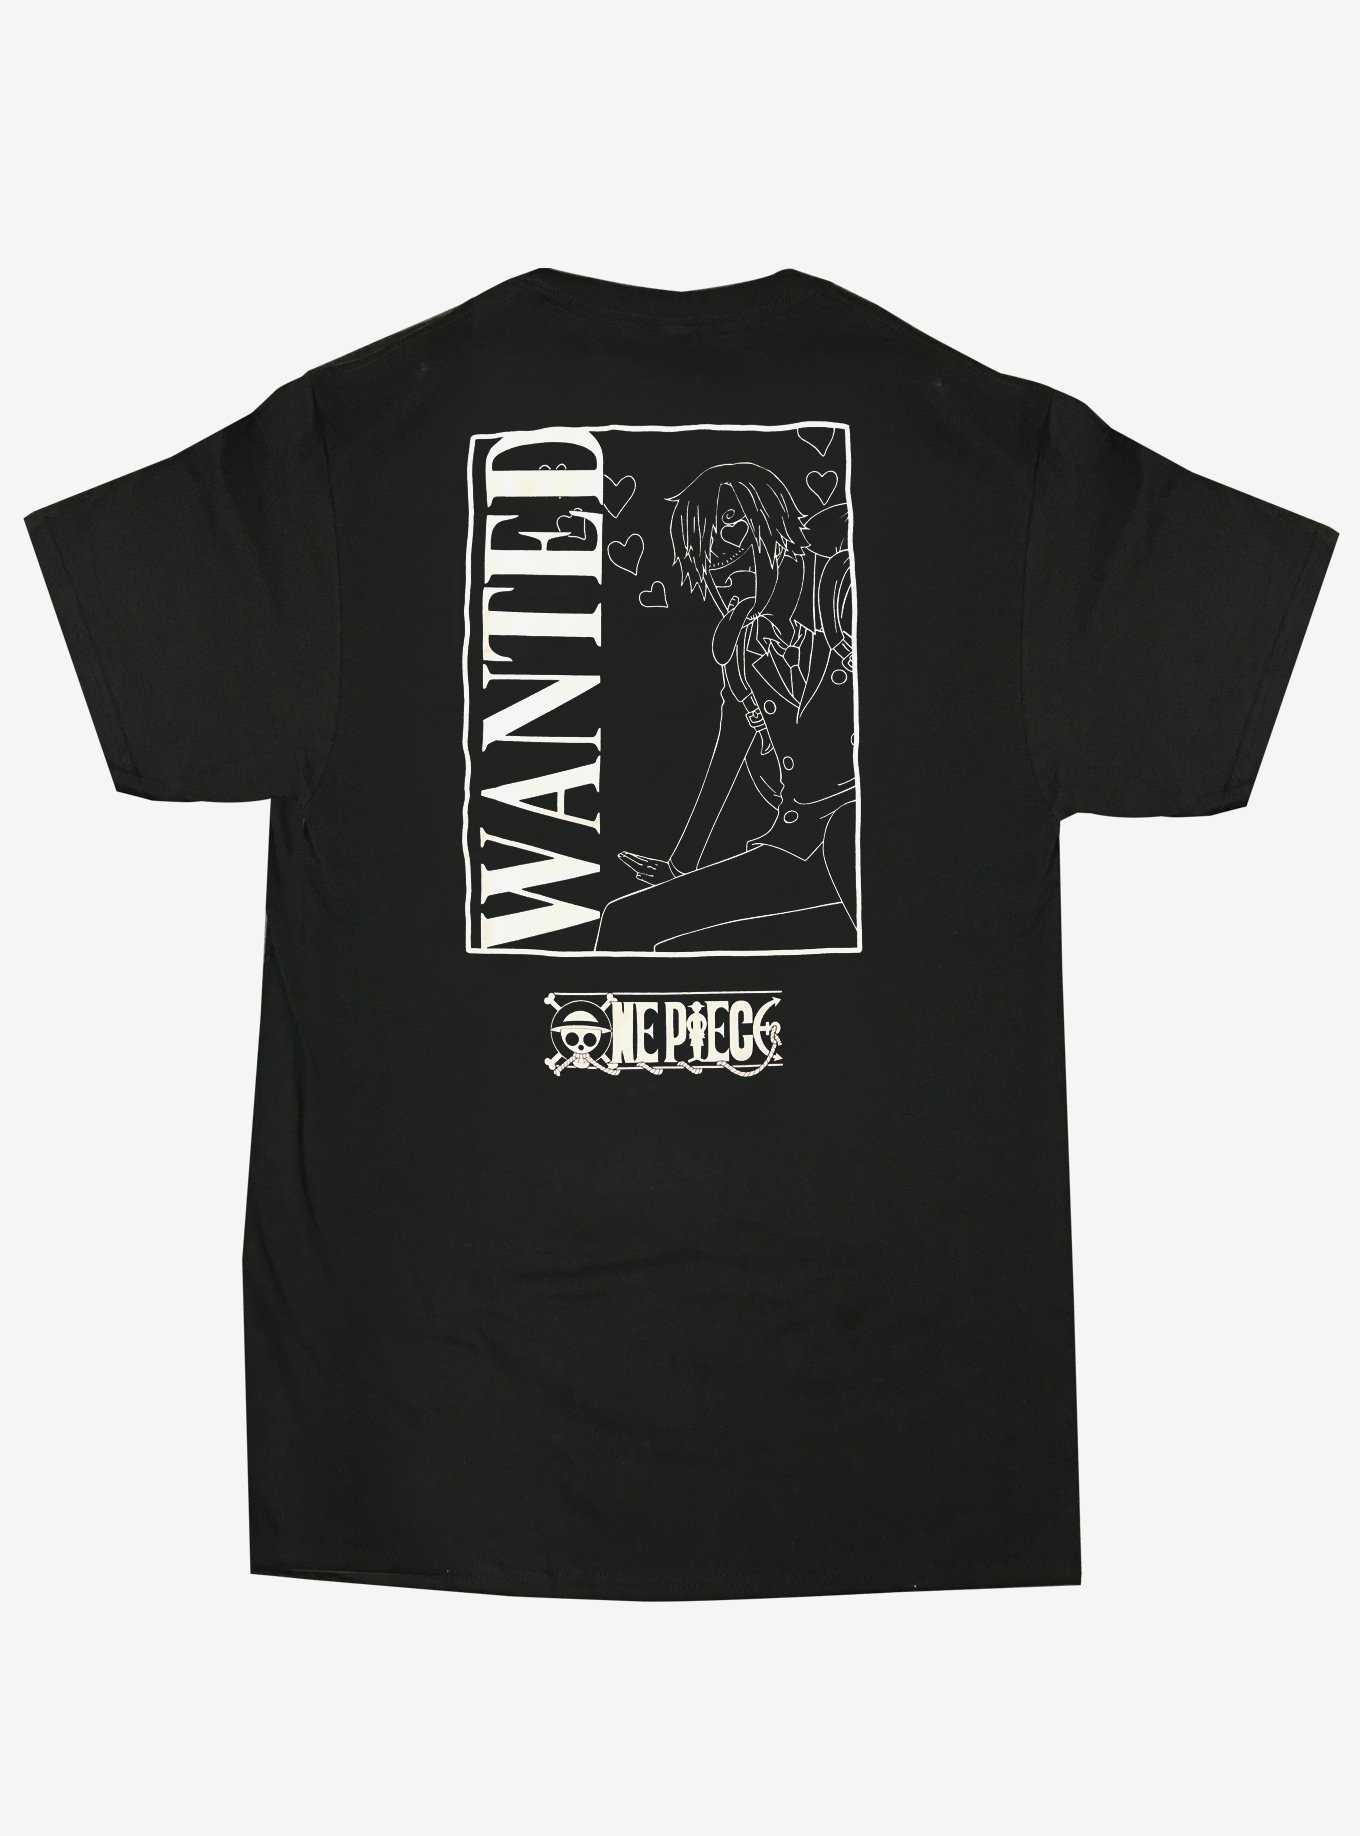 One Piece Sanji Wanted Poster Double-Sided T-Shirt, , hi-res